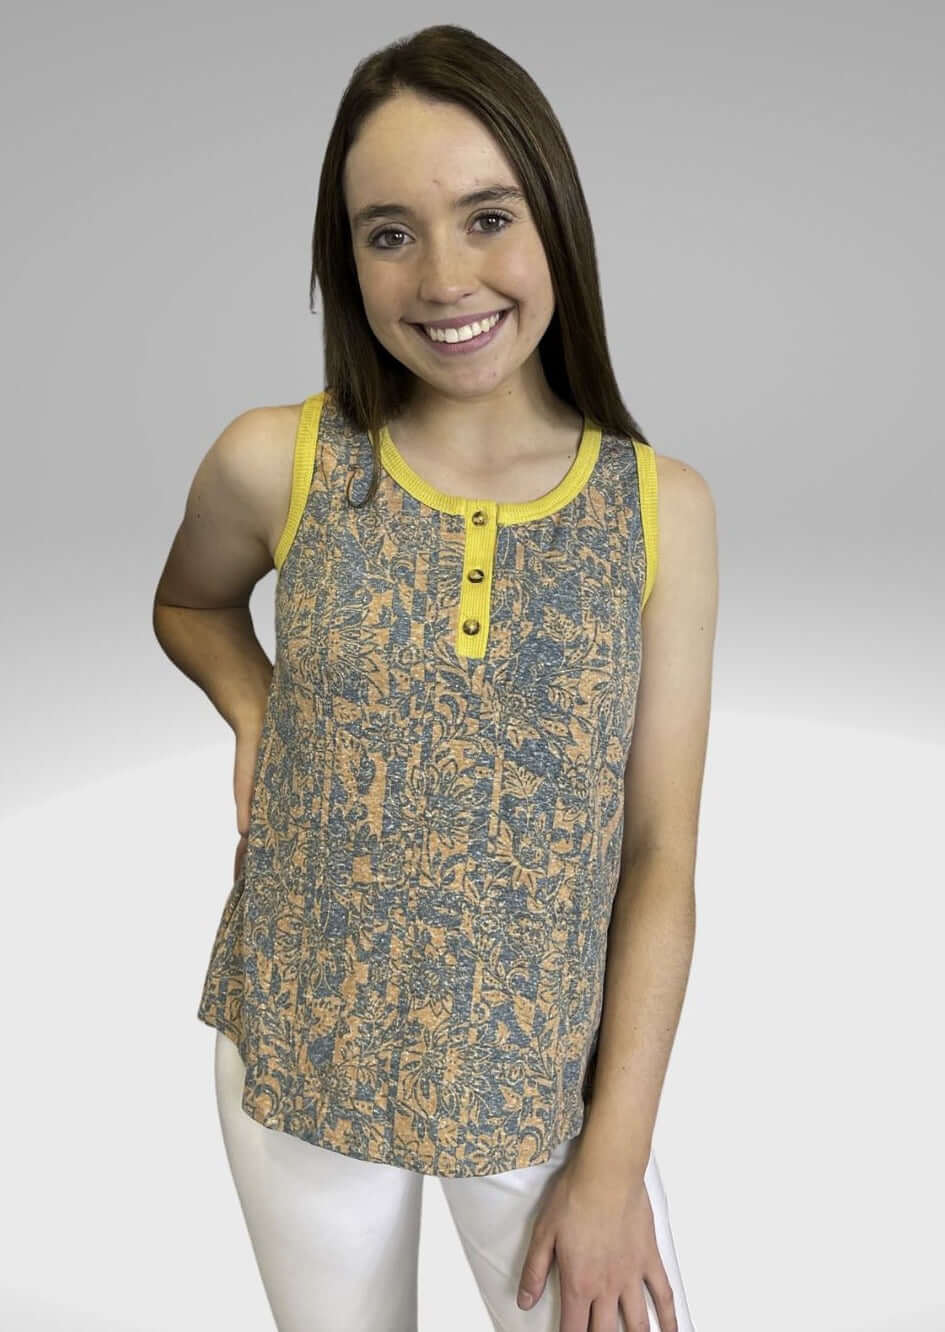 Floral Print Ladies Faded Out Henley Tank Top Available in Navy & Orange with Mustard Yellow Collar | Made in USA | Classy Cozy Cool American Boutique